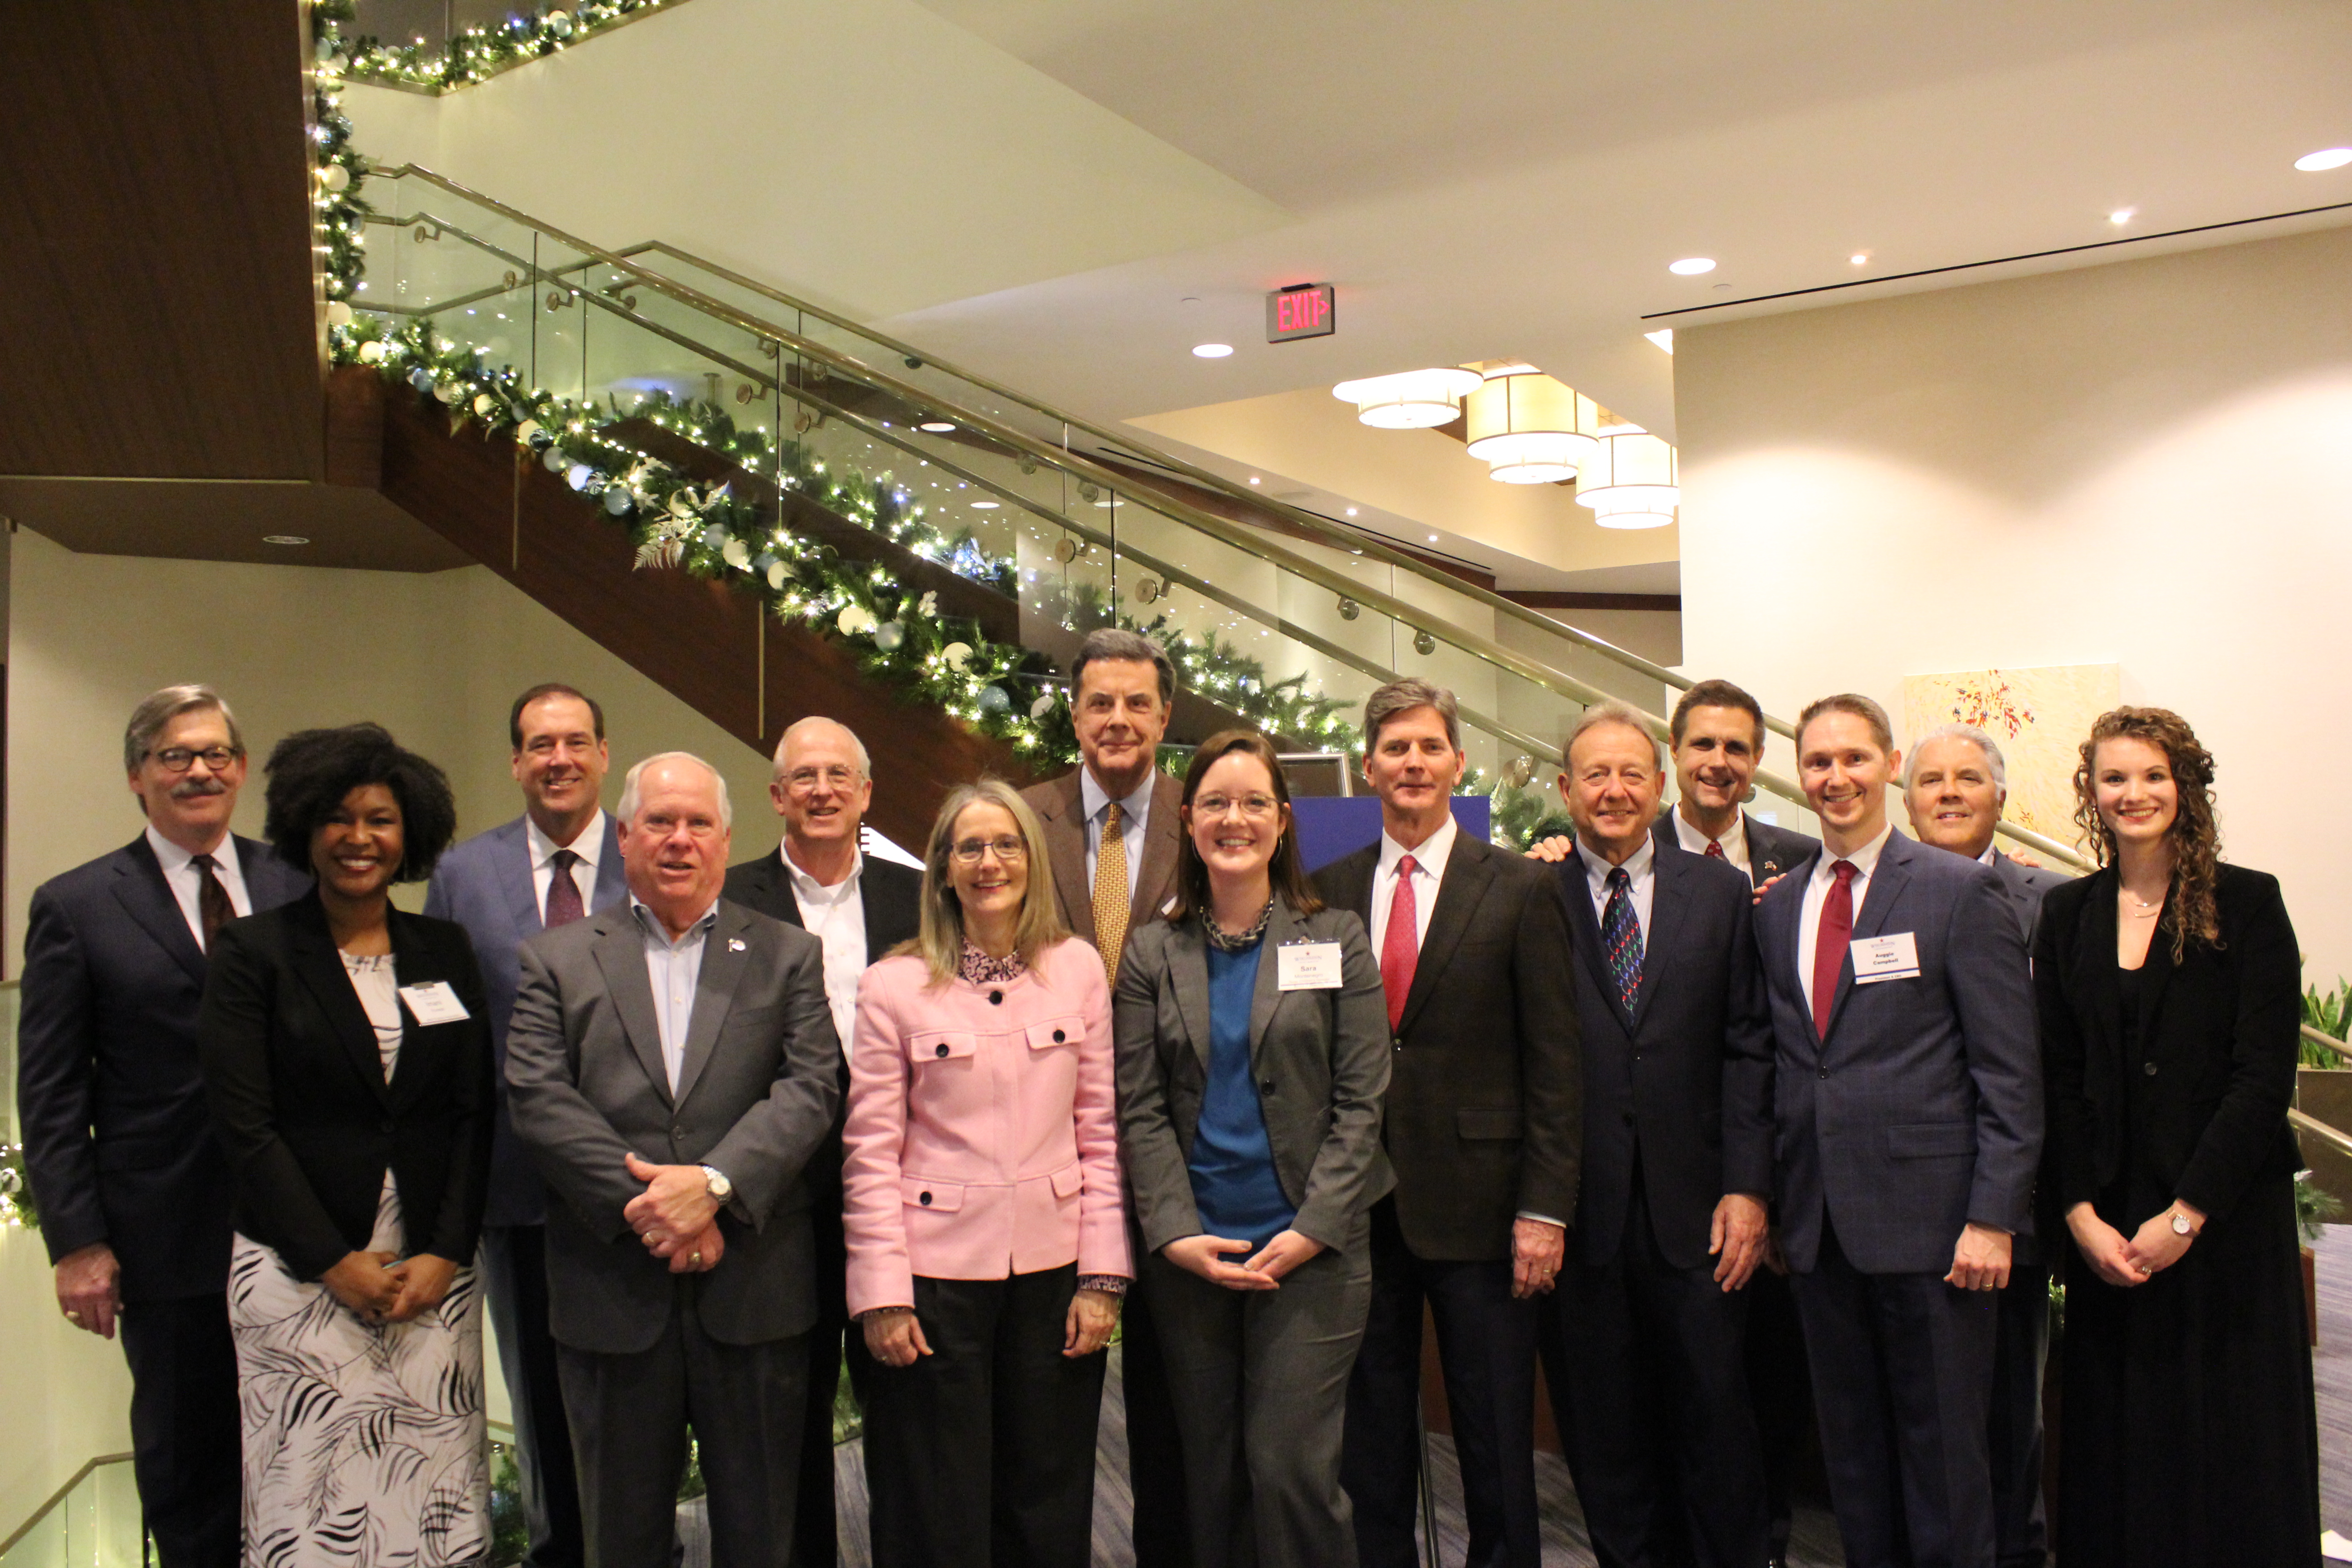 WHA’s Holiday Reception Recognizes 2018 Award Winners!